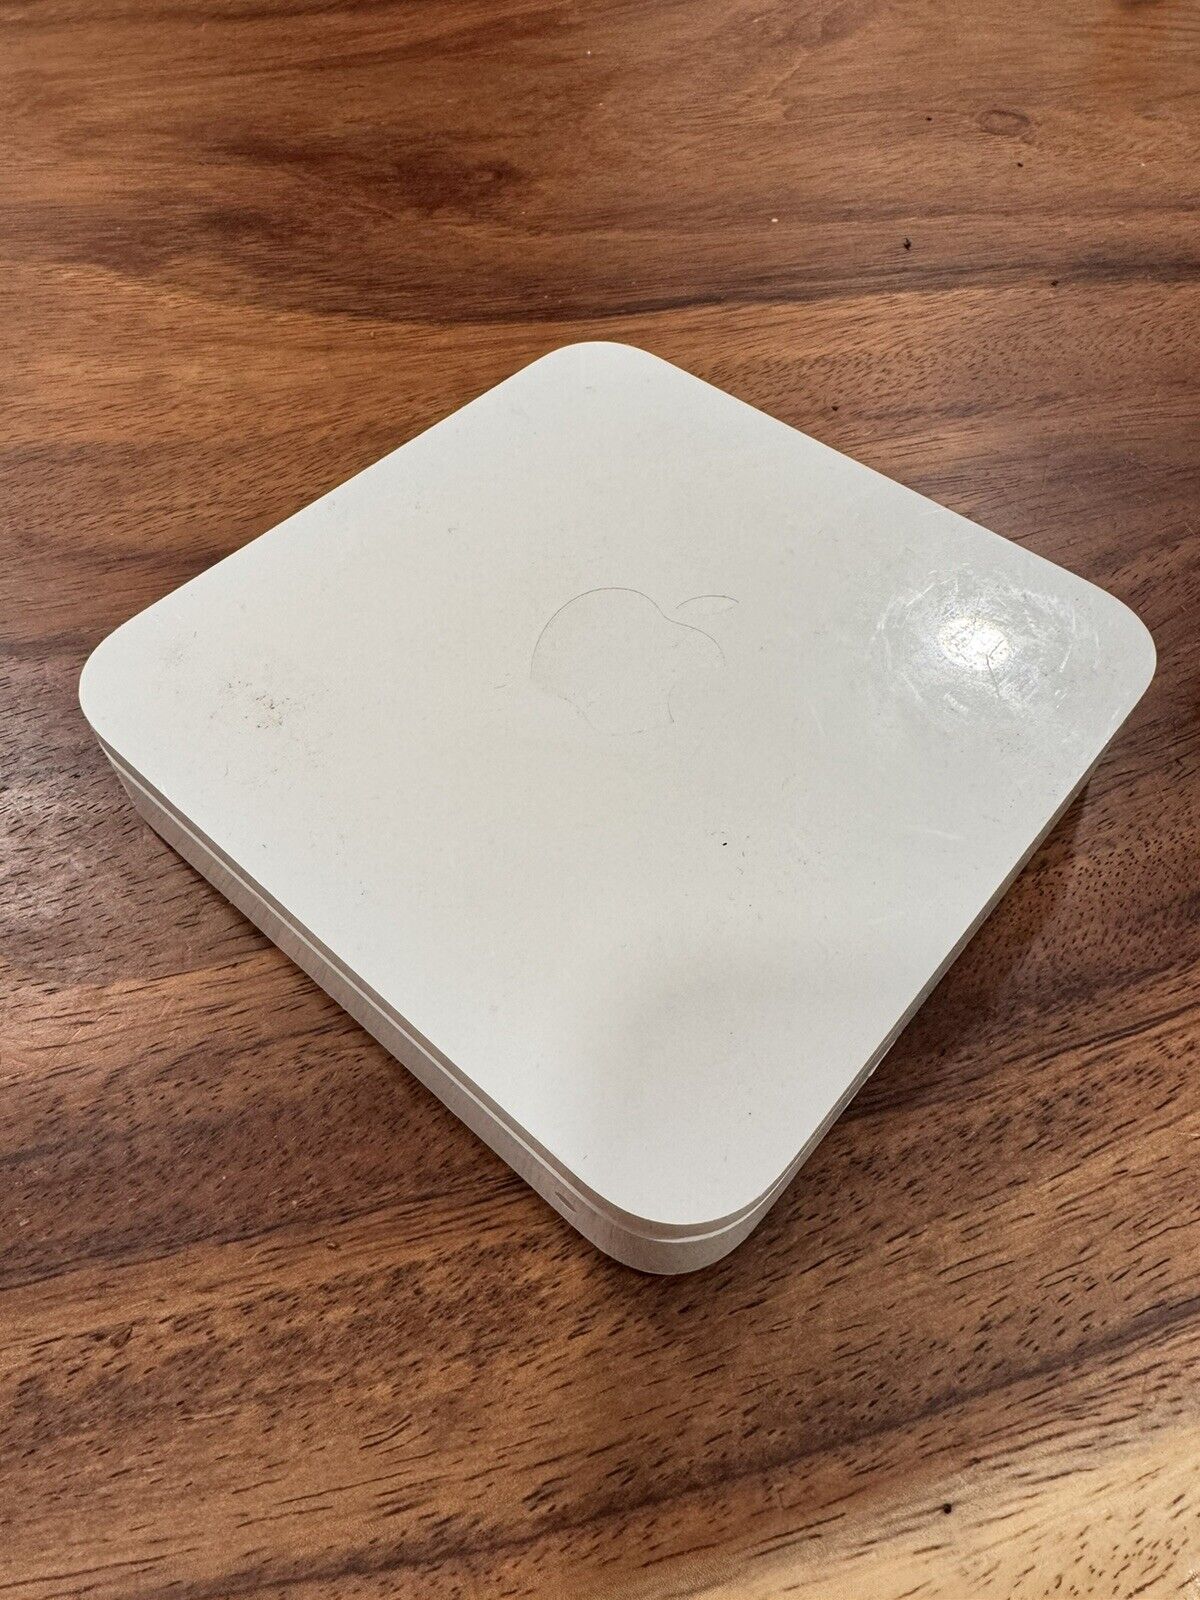 Apple A1143 AirPort Extreme Base